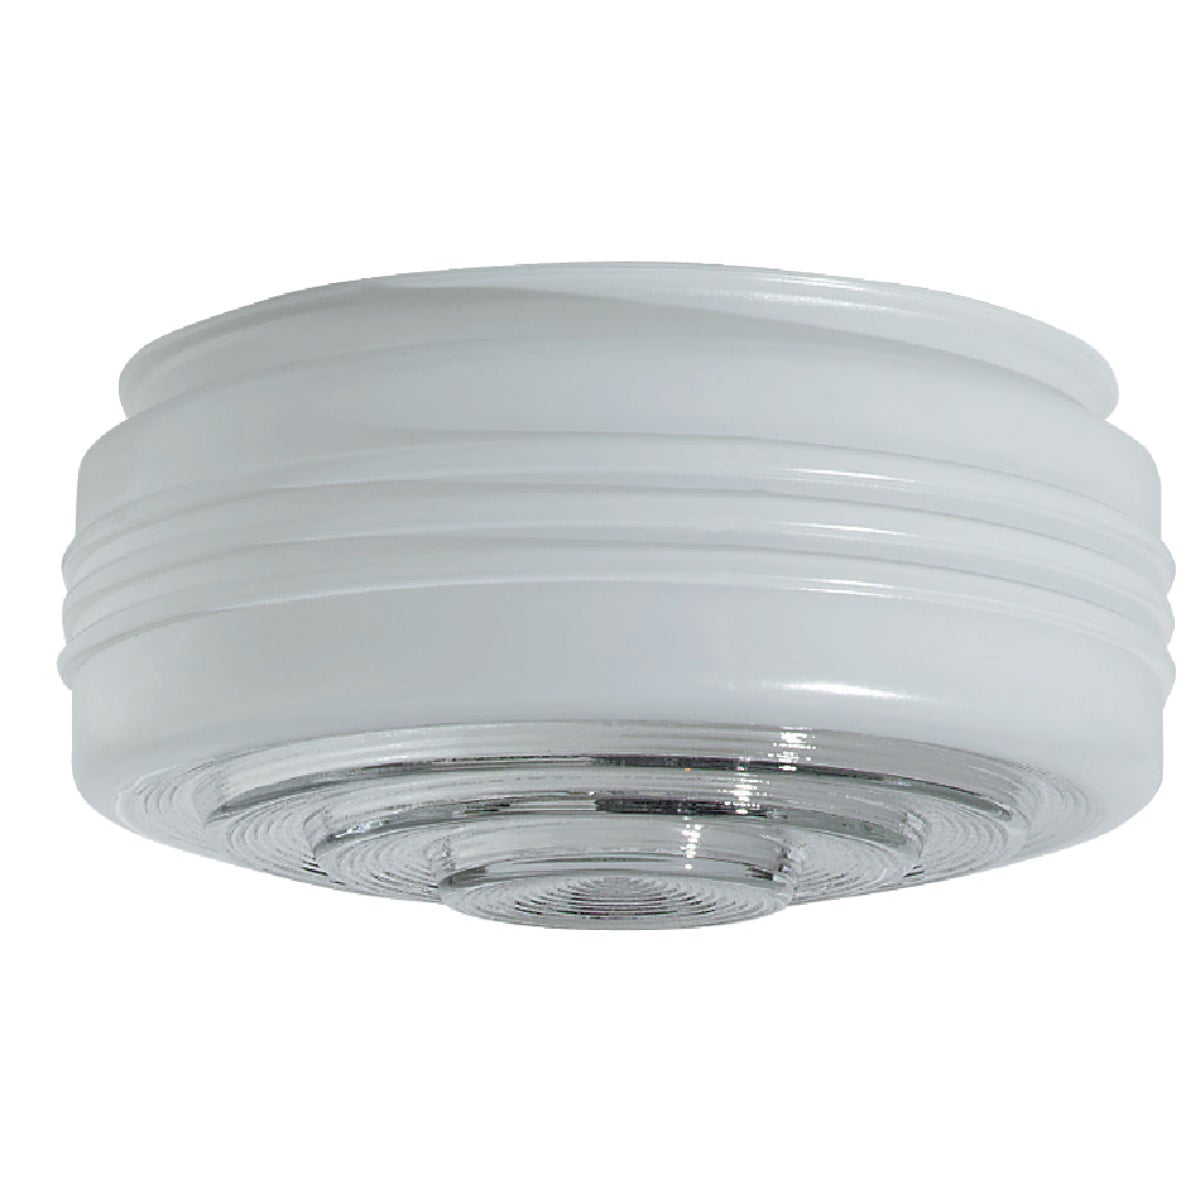 Item 525471, Drum style ceiling shade compatible with a variety of light fixtures.